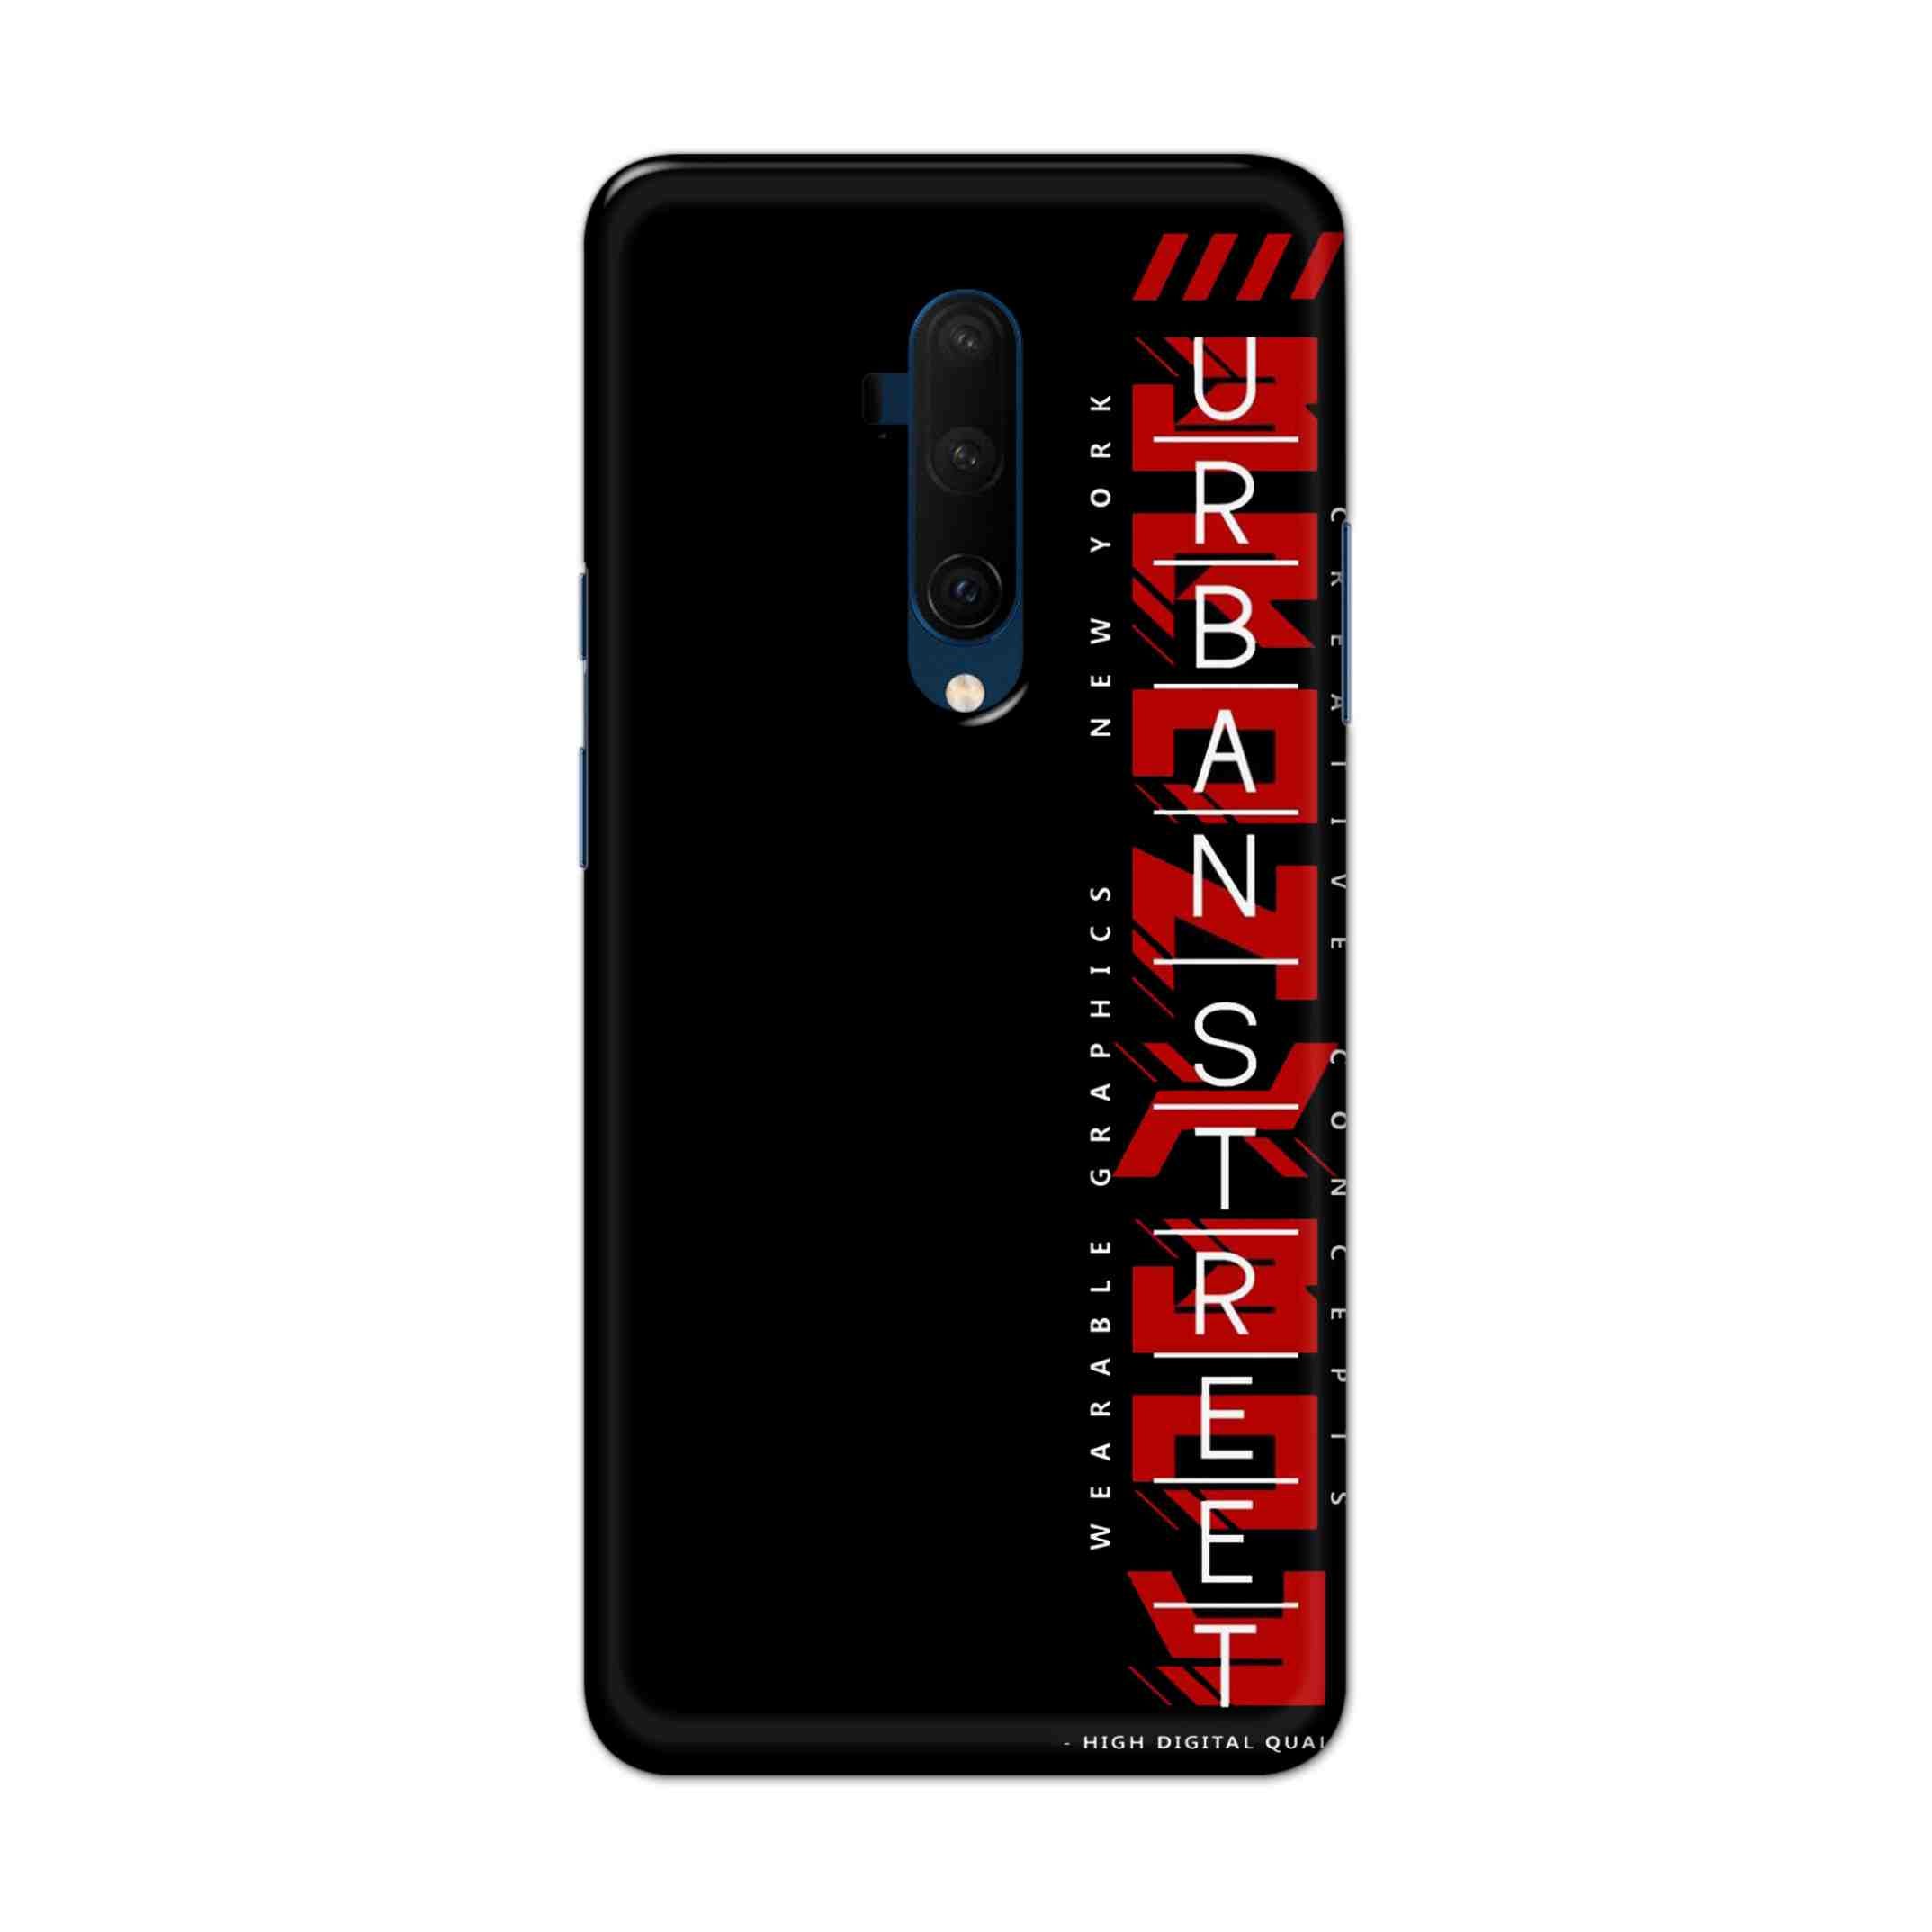 Buy Urban Street Hard Back Mobile Phone Case Cover For OnePlus 7T Pro Online